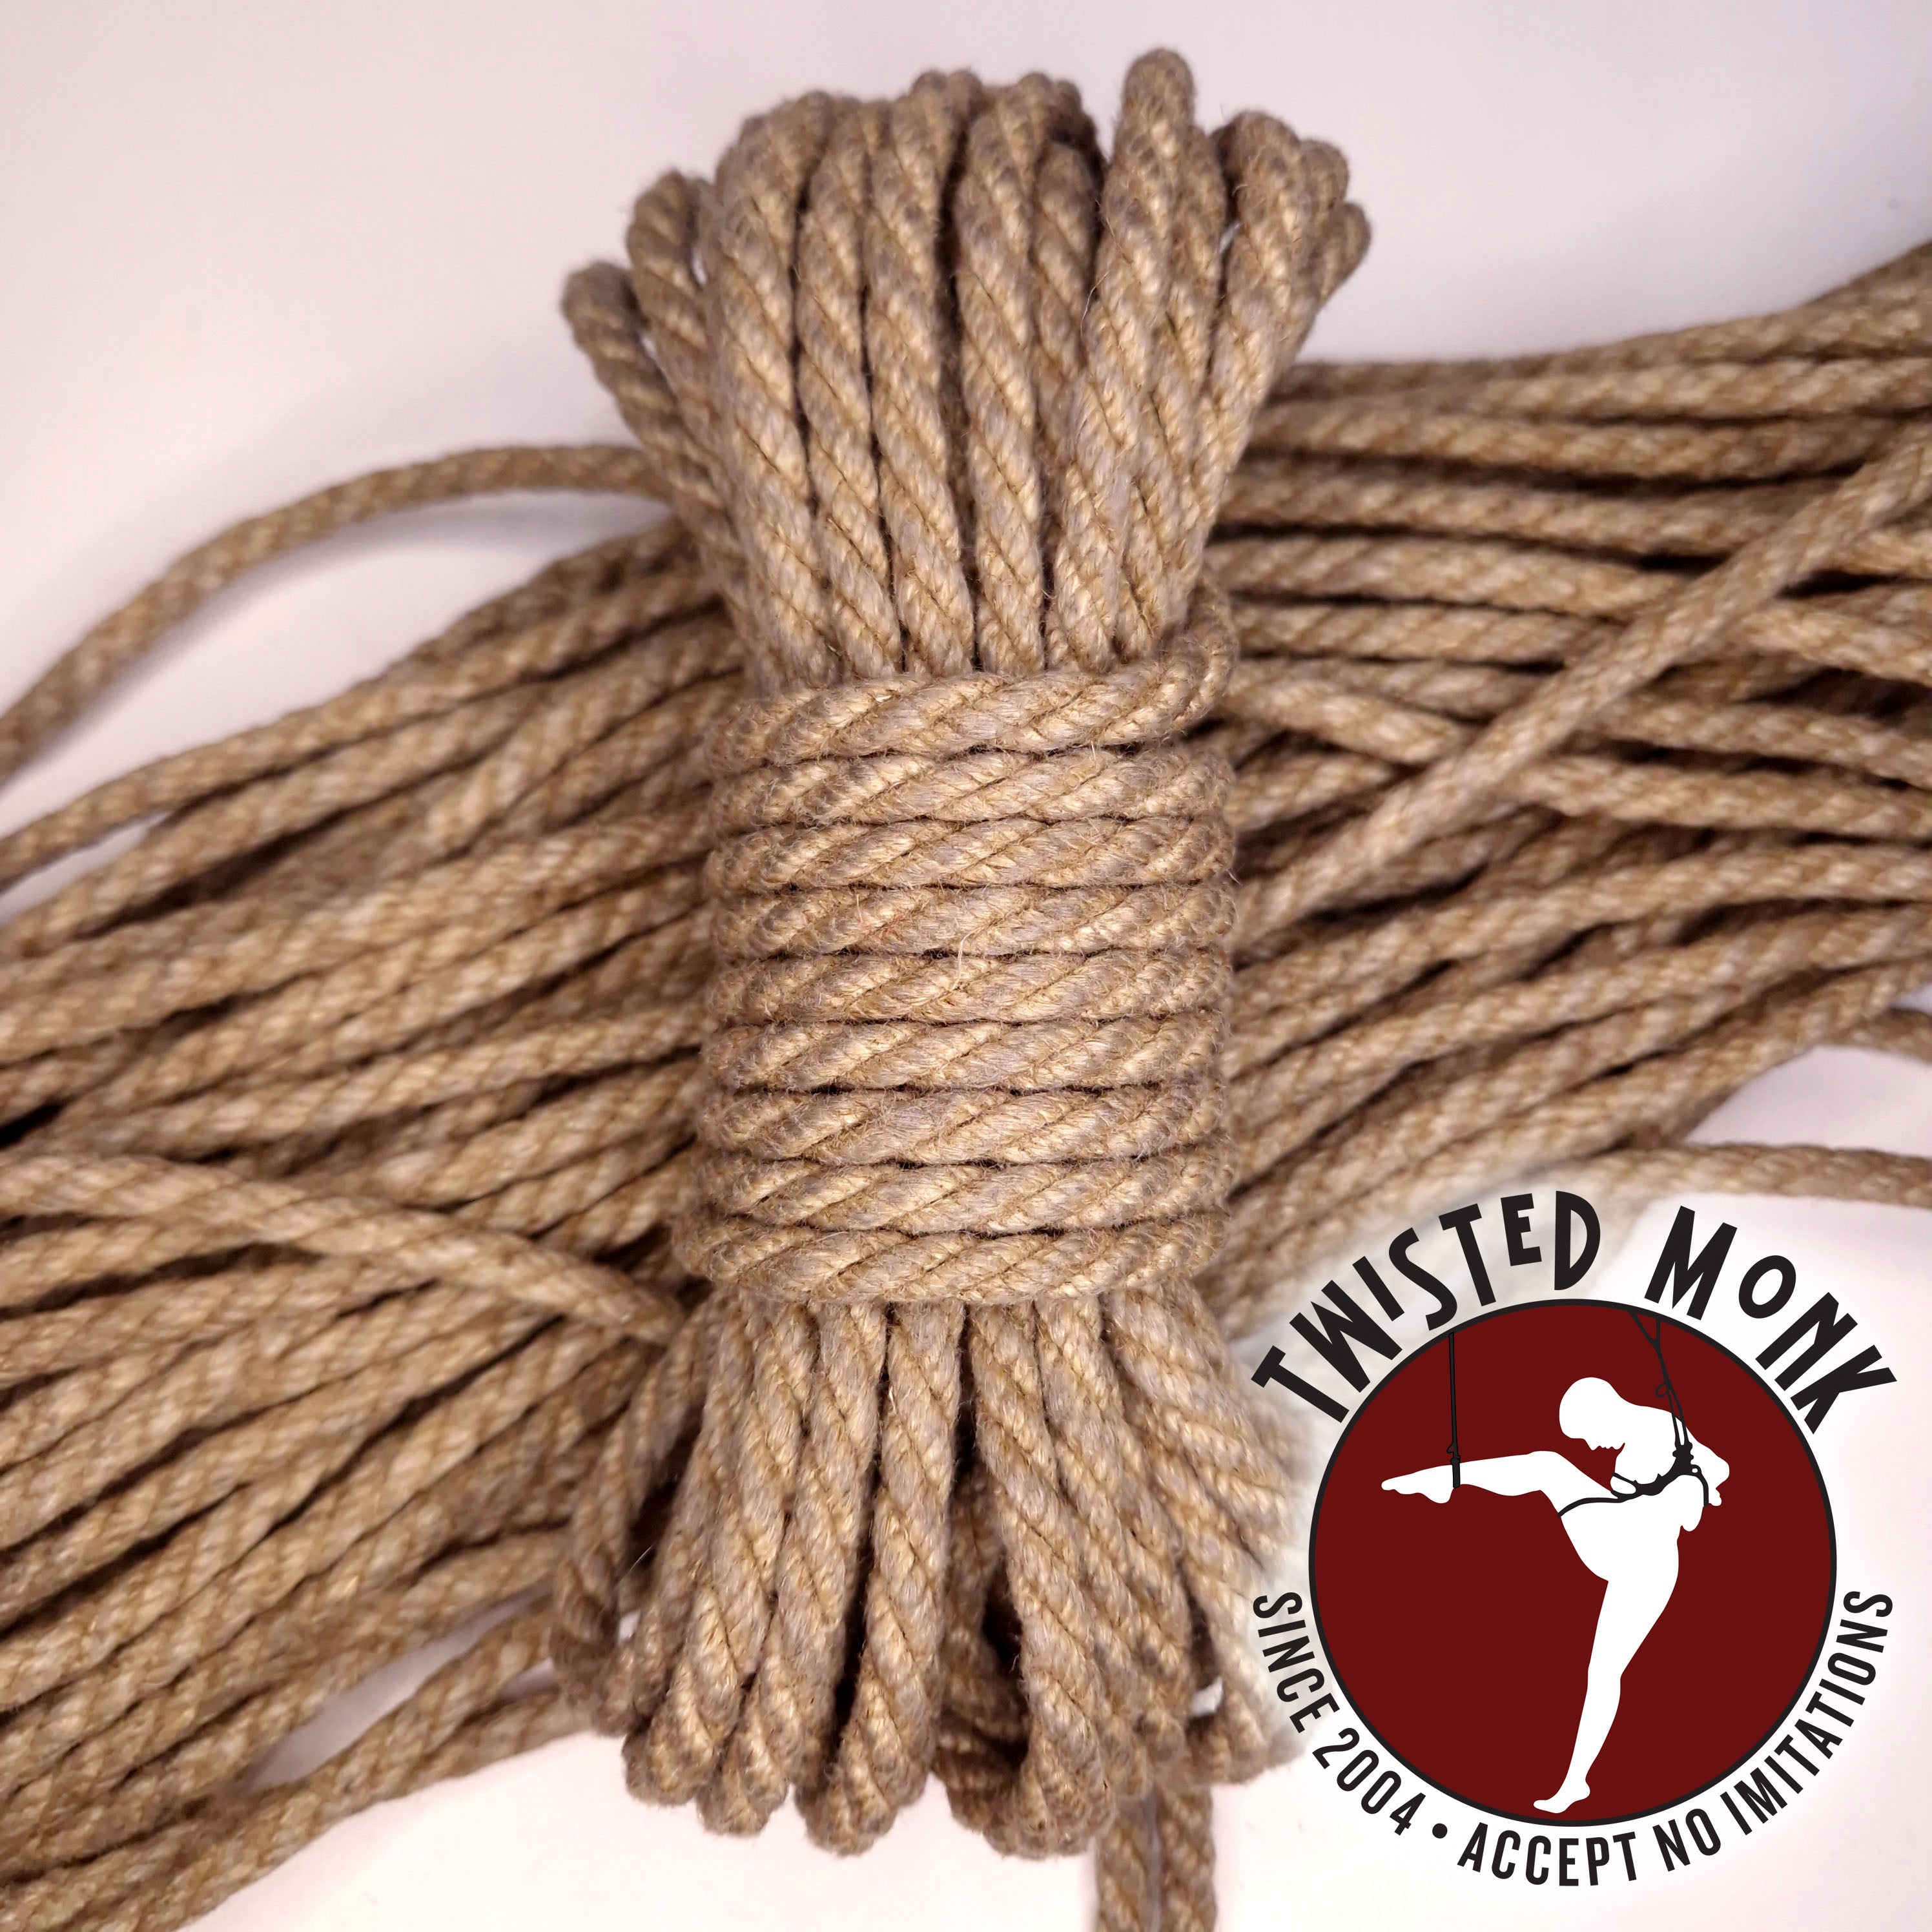 Natural Hemp Rope - The Twisted Monk